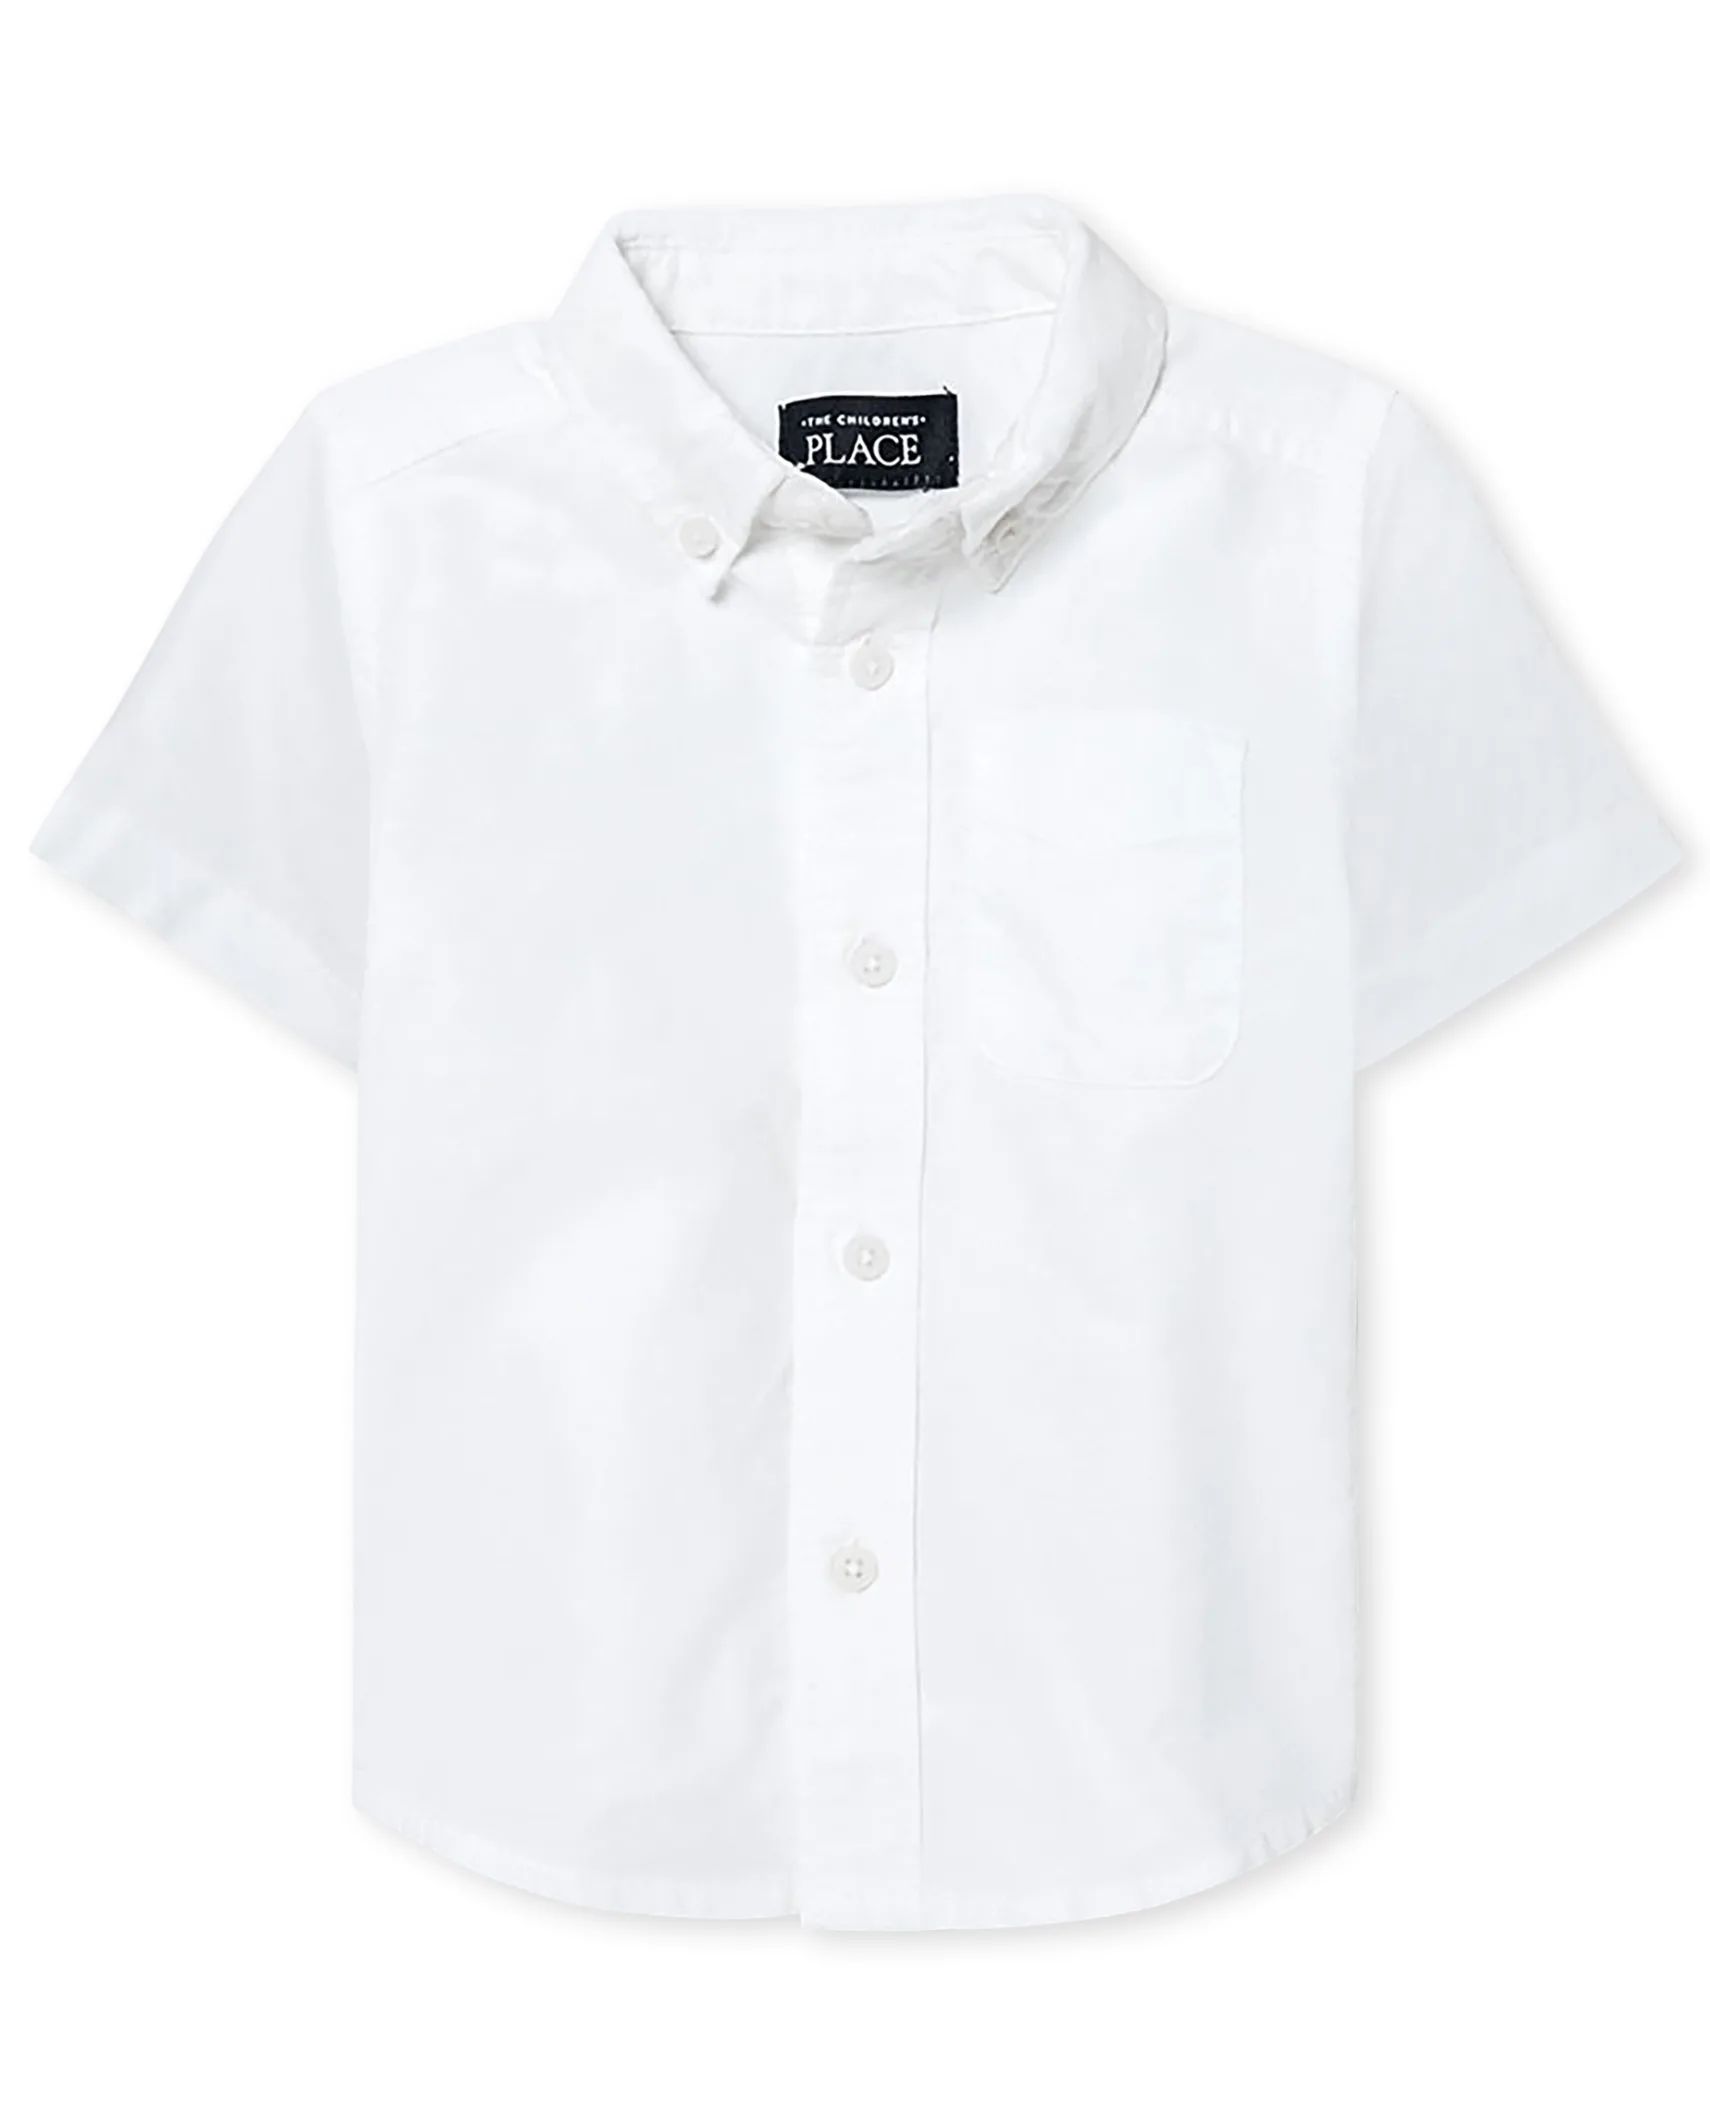 Baby And Toddler Boys Uniform Oxford Button Down Shirt - white | The Children's Place